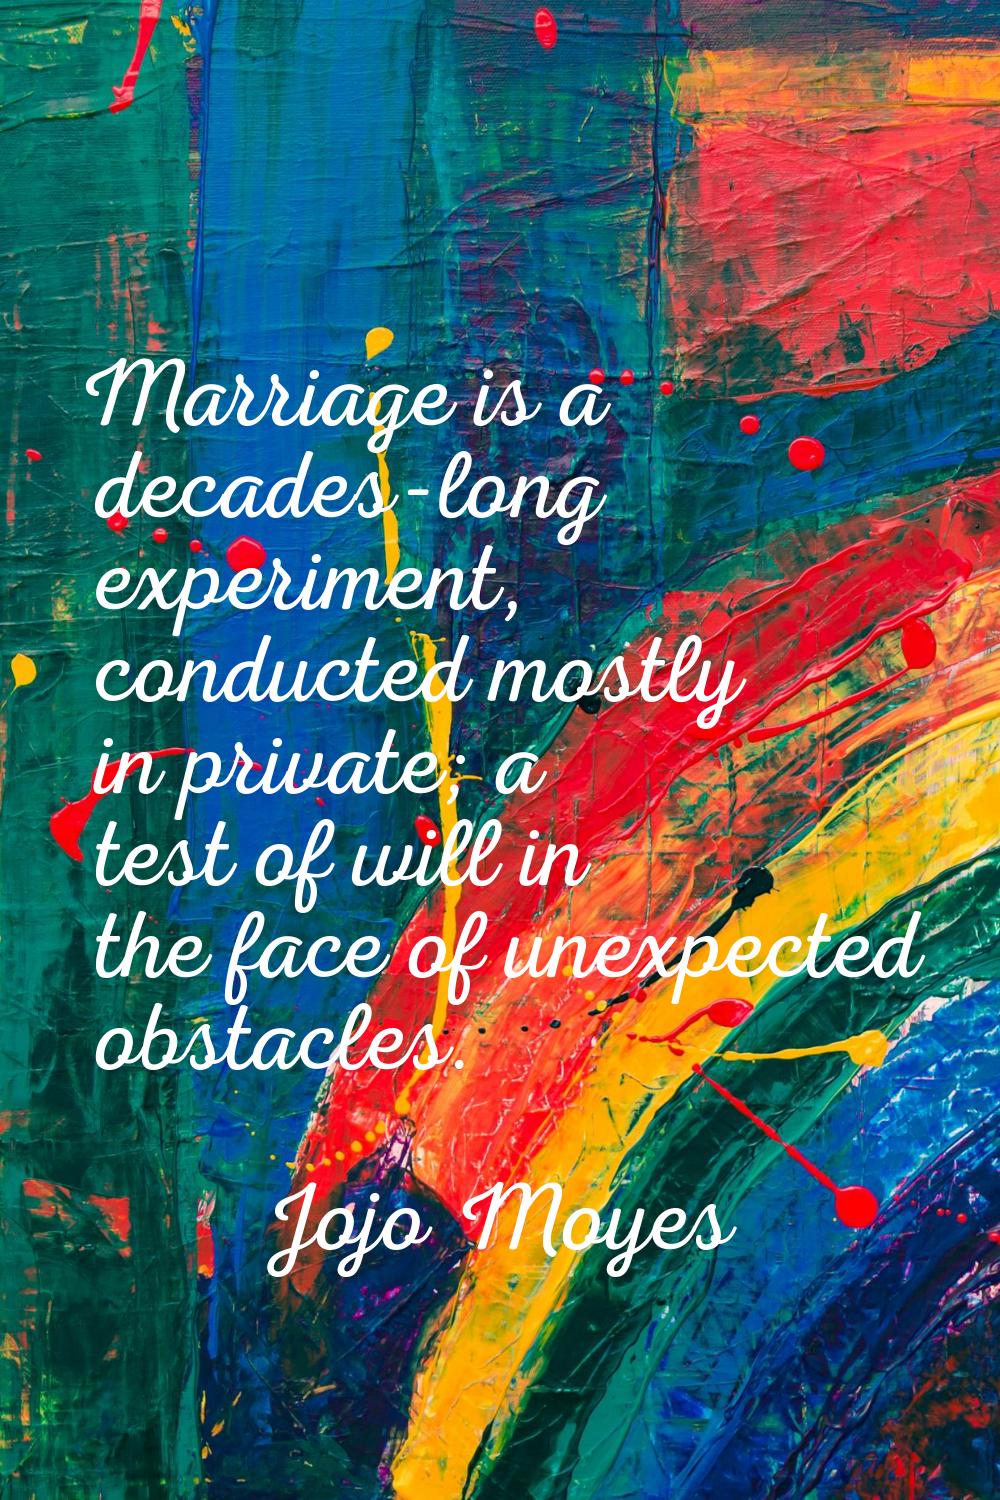 Marriage is a decades-long experiment, conducted mostly in private; a test of will in the face of u